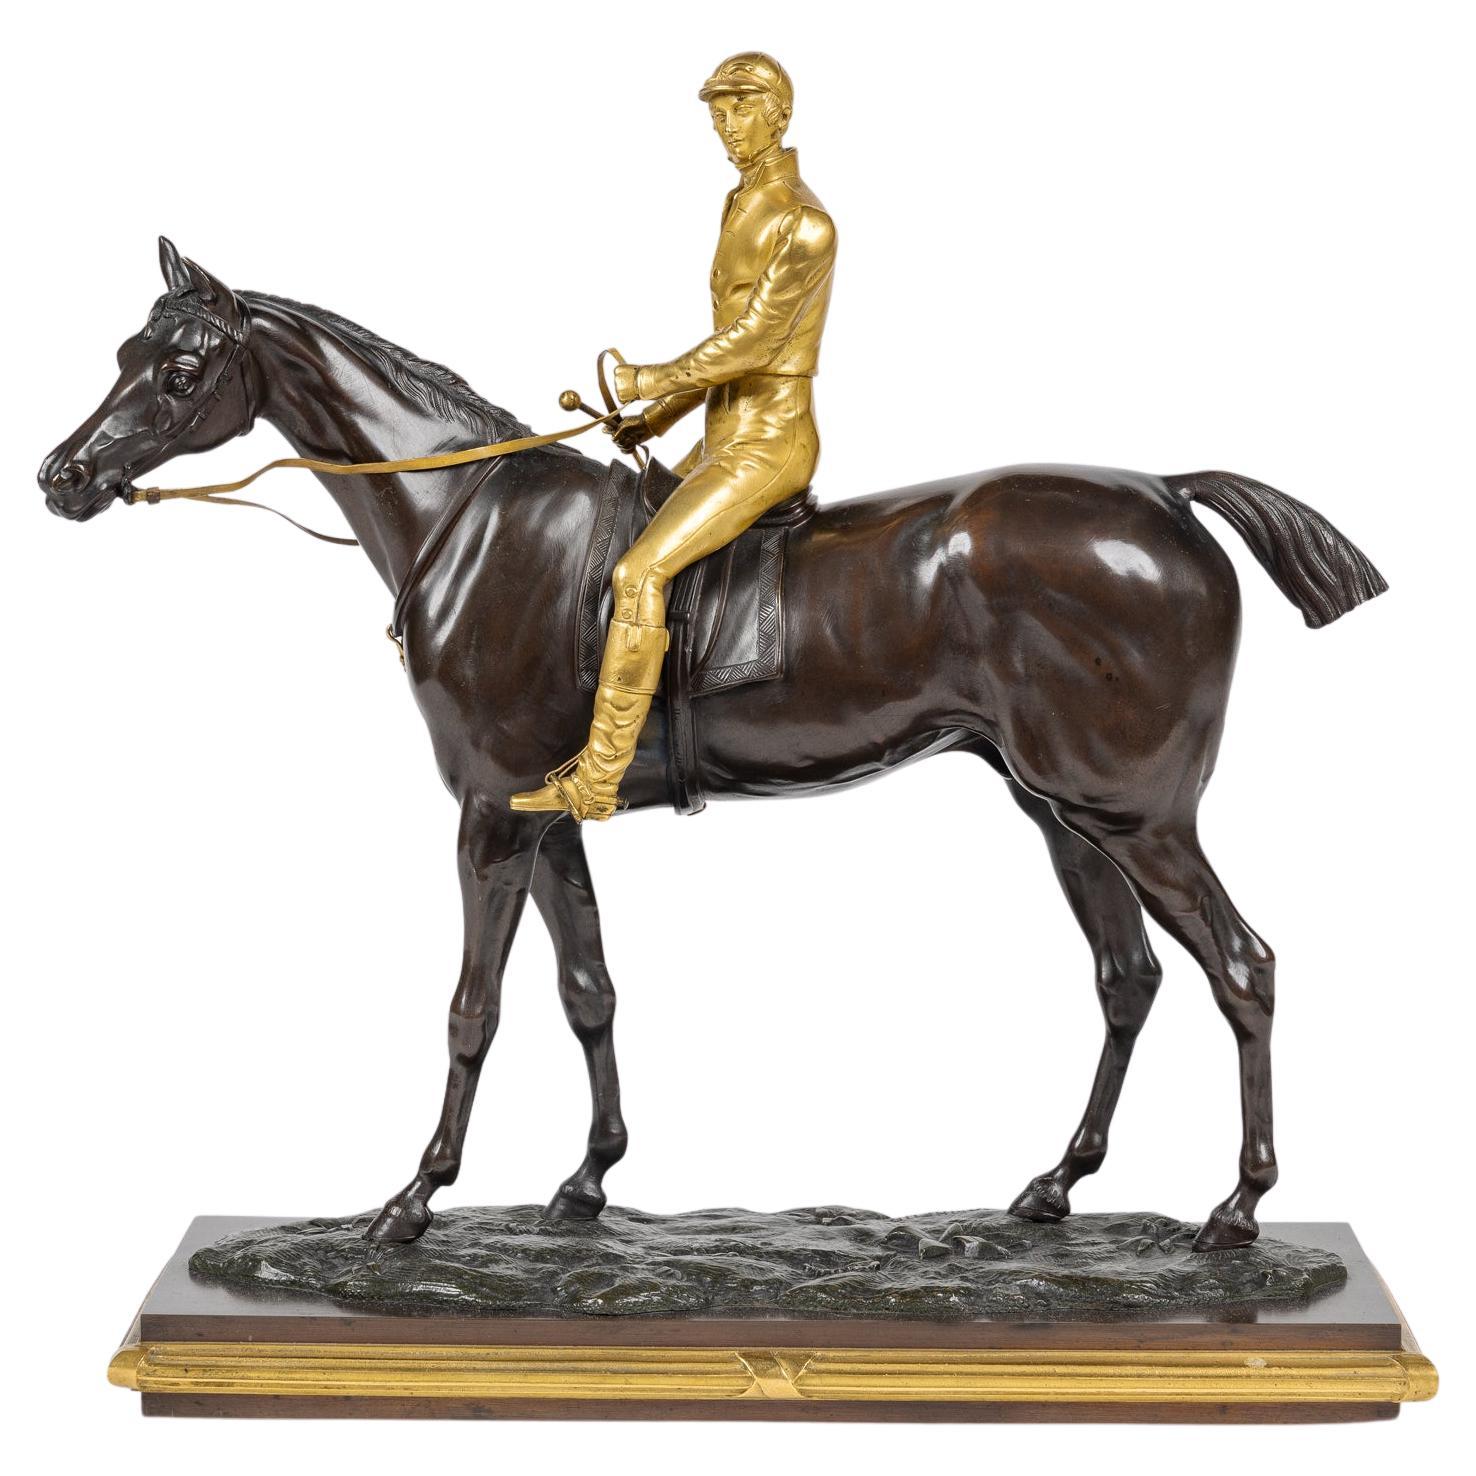 Isidore-Jules Bonheur, A Rare Gilt and Patinated Bronze Jockey on A Horse For Sale